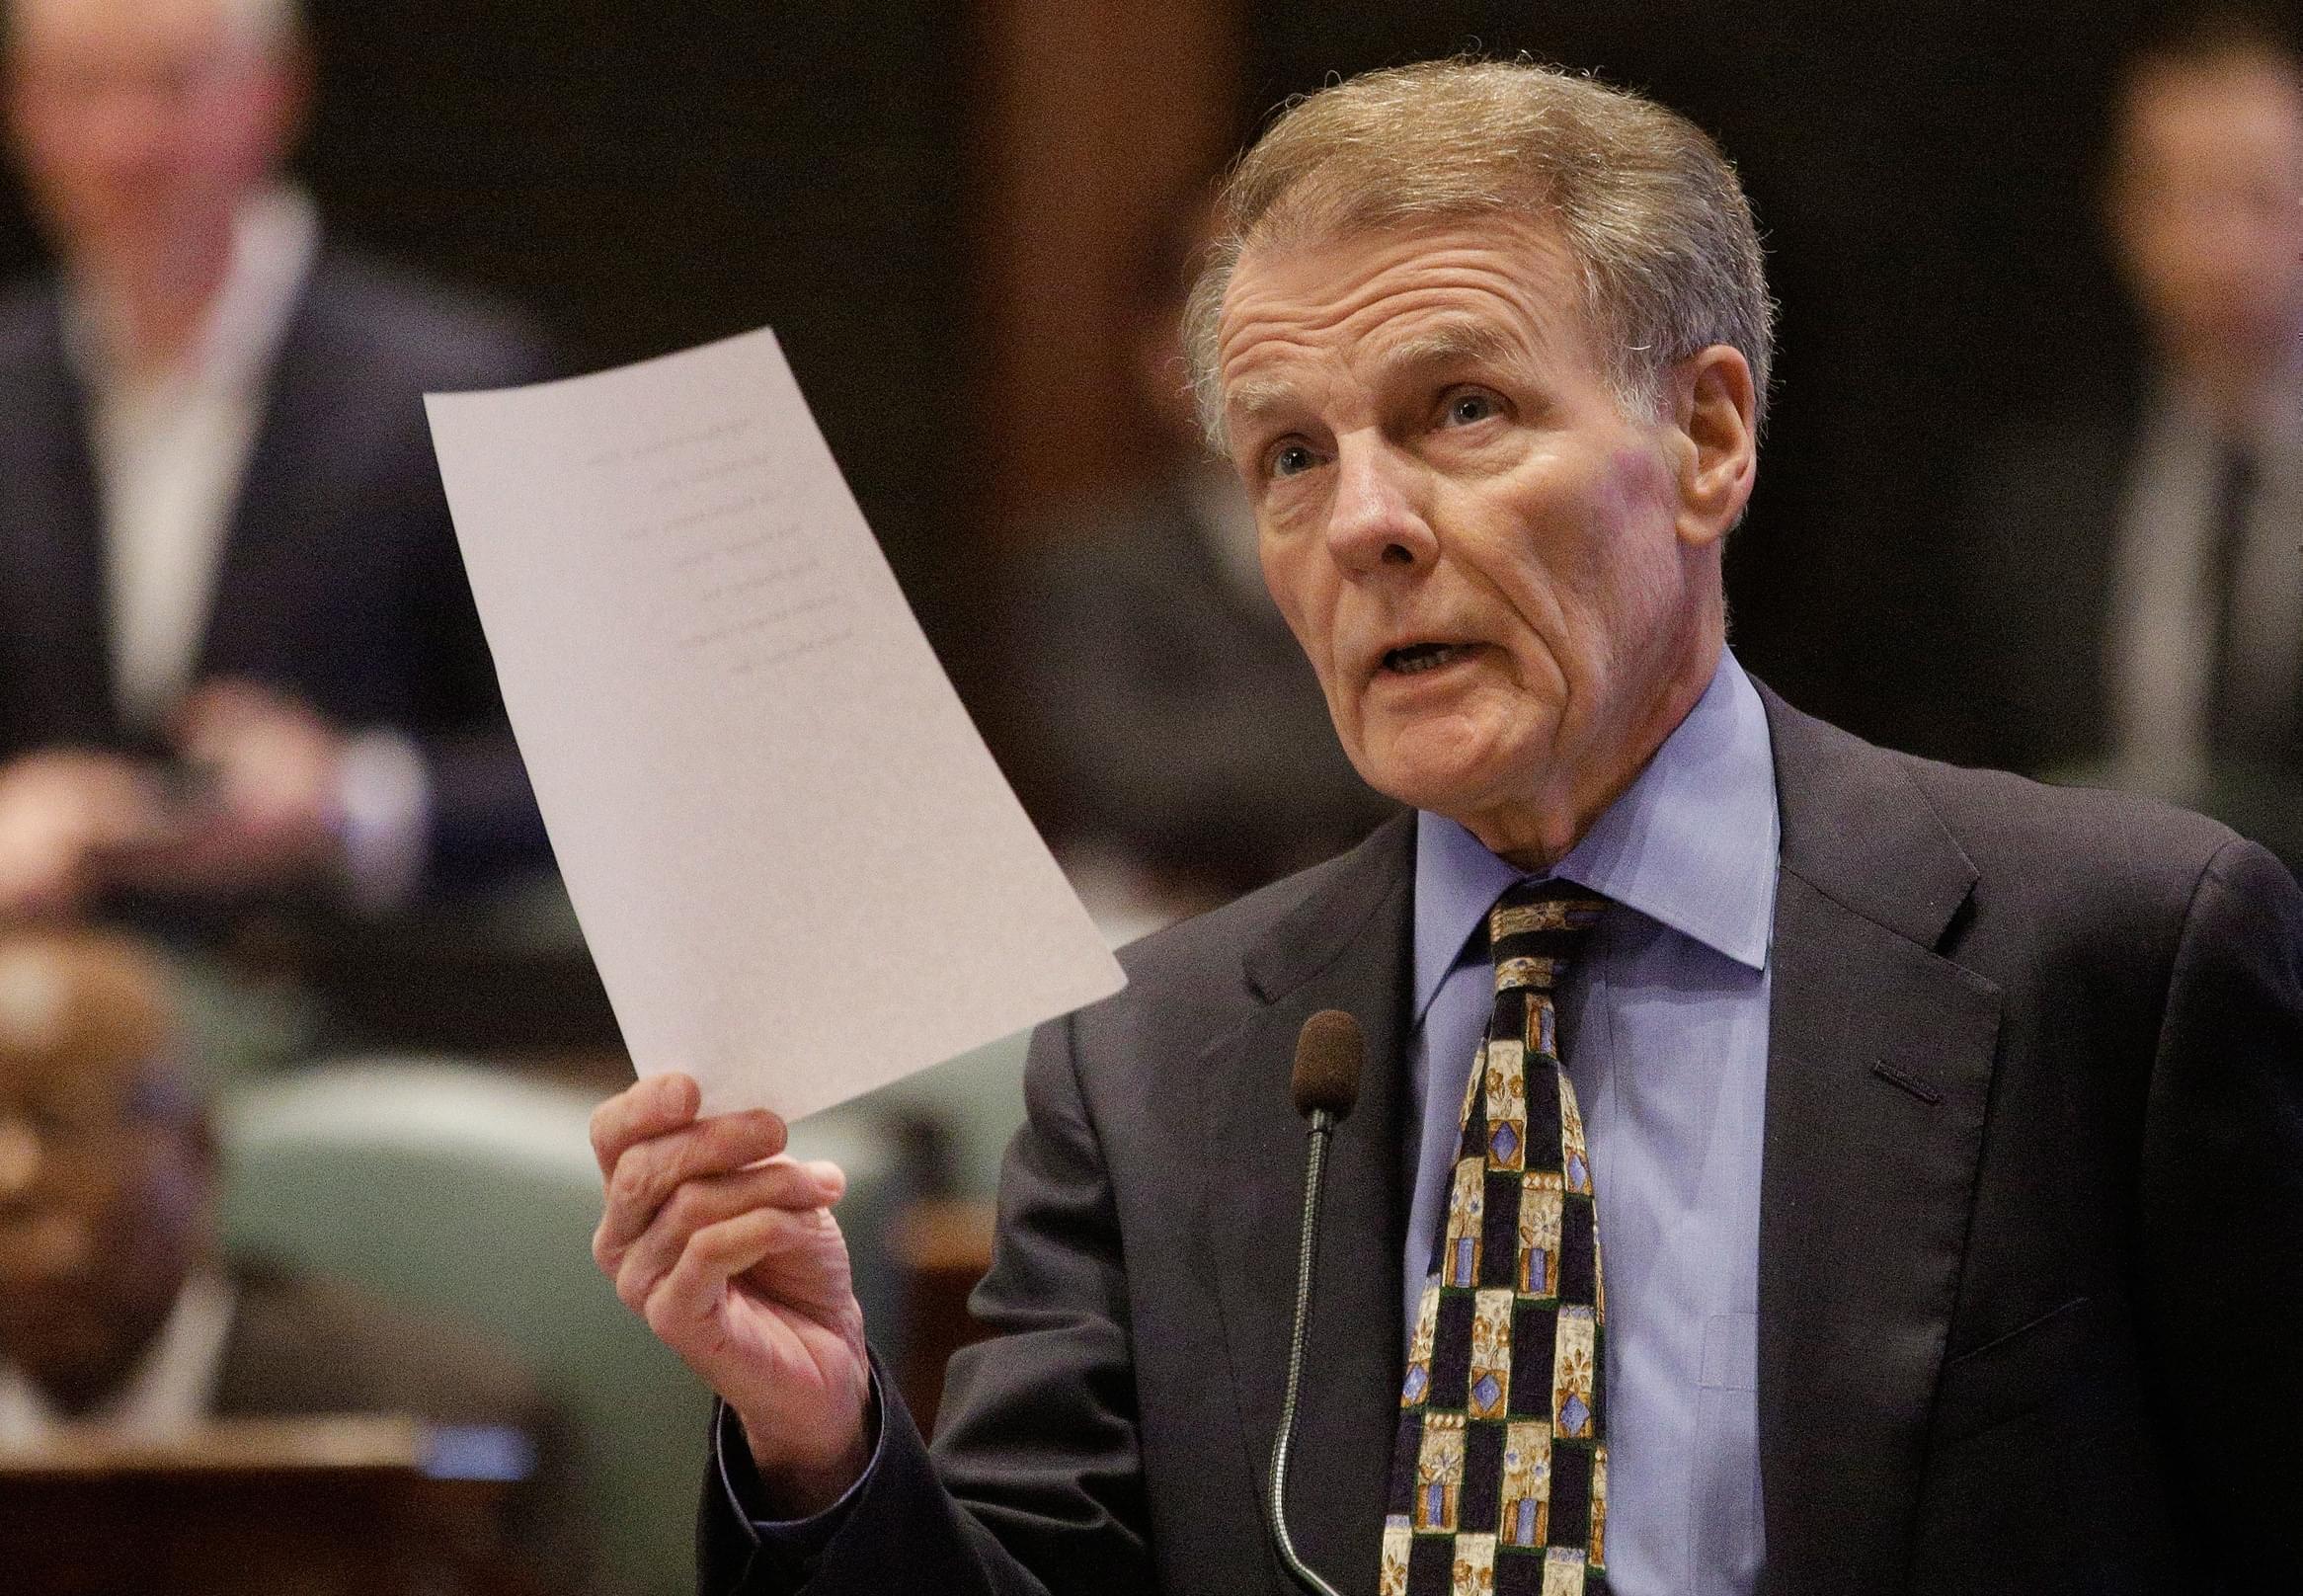 Illinois Speaker of the House Michael Madigan, D-Chicago, speaks to lawmakers while on the House floor during session at the Illinois State Capitol Tuesday, Oct. 20, 2015, in Springfield, Ill